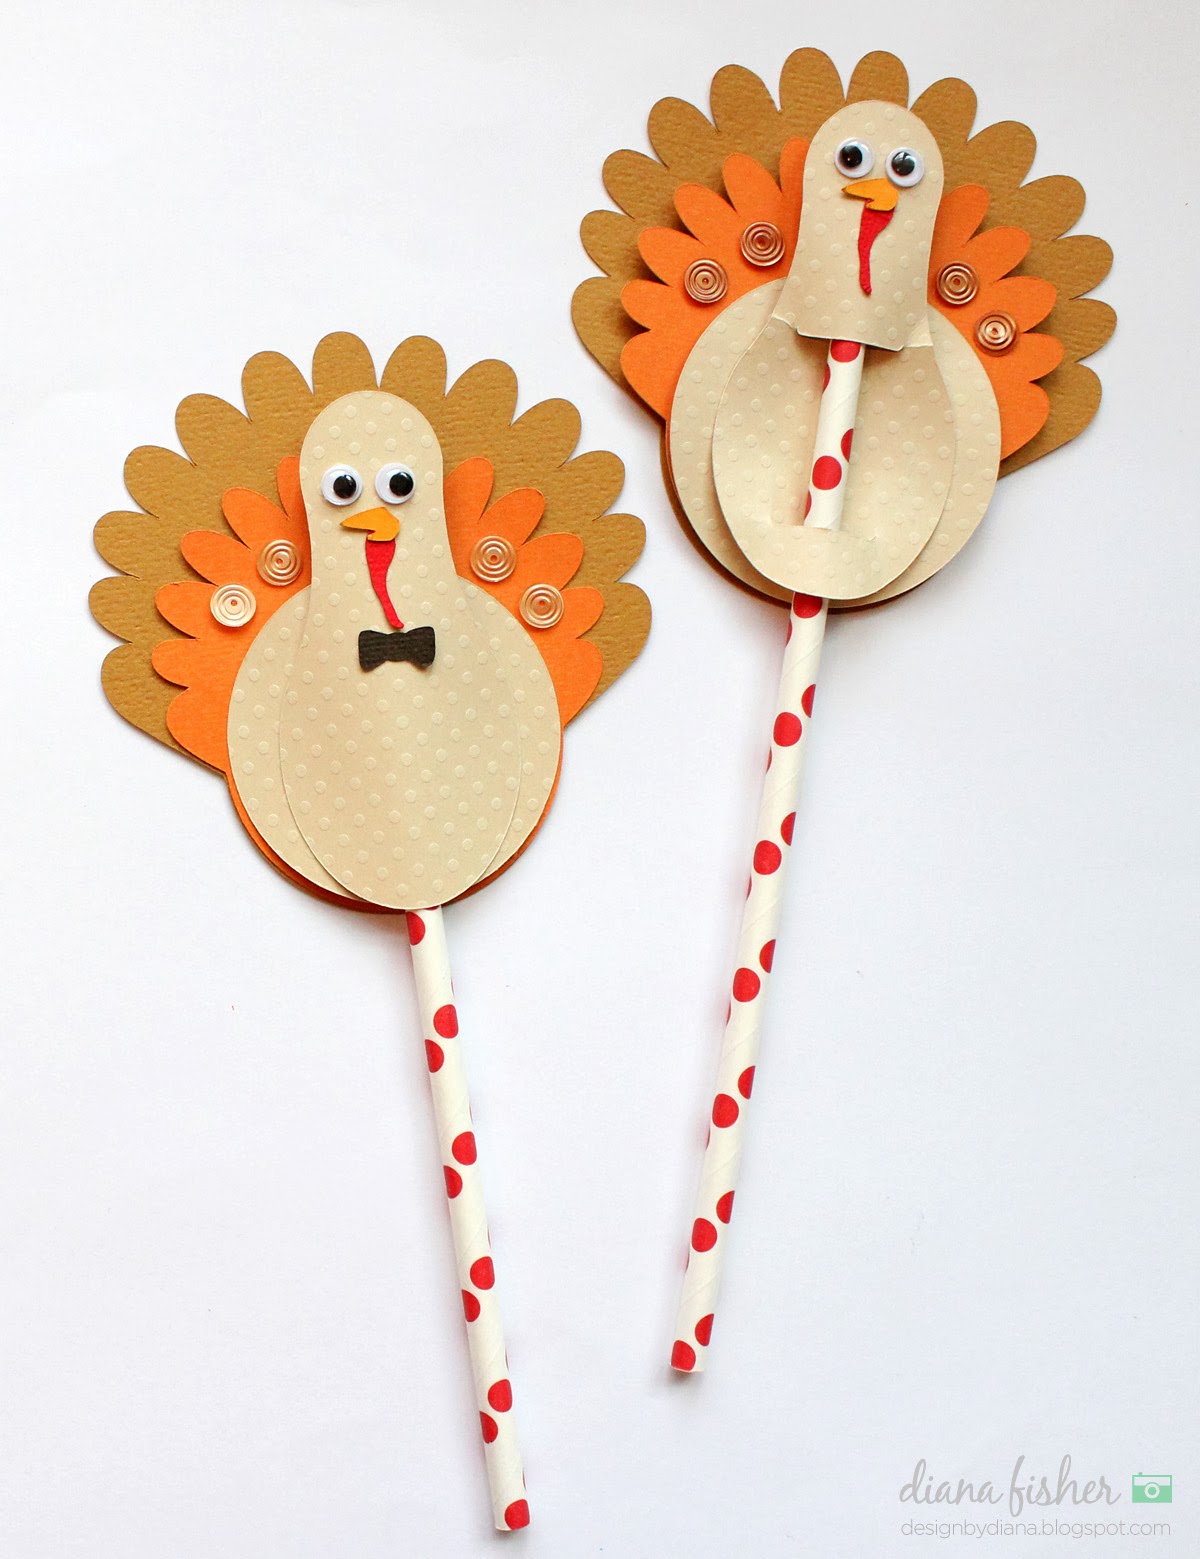 Samantha Walker's Imaginary World: Turkey Toppers by Diana Fisher